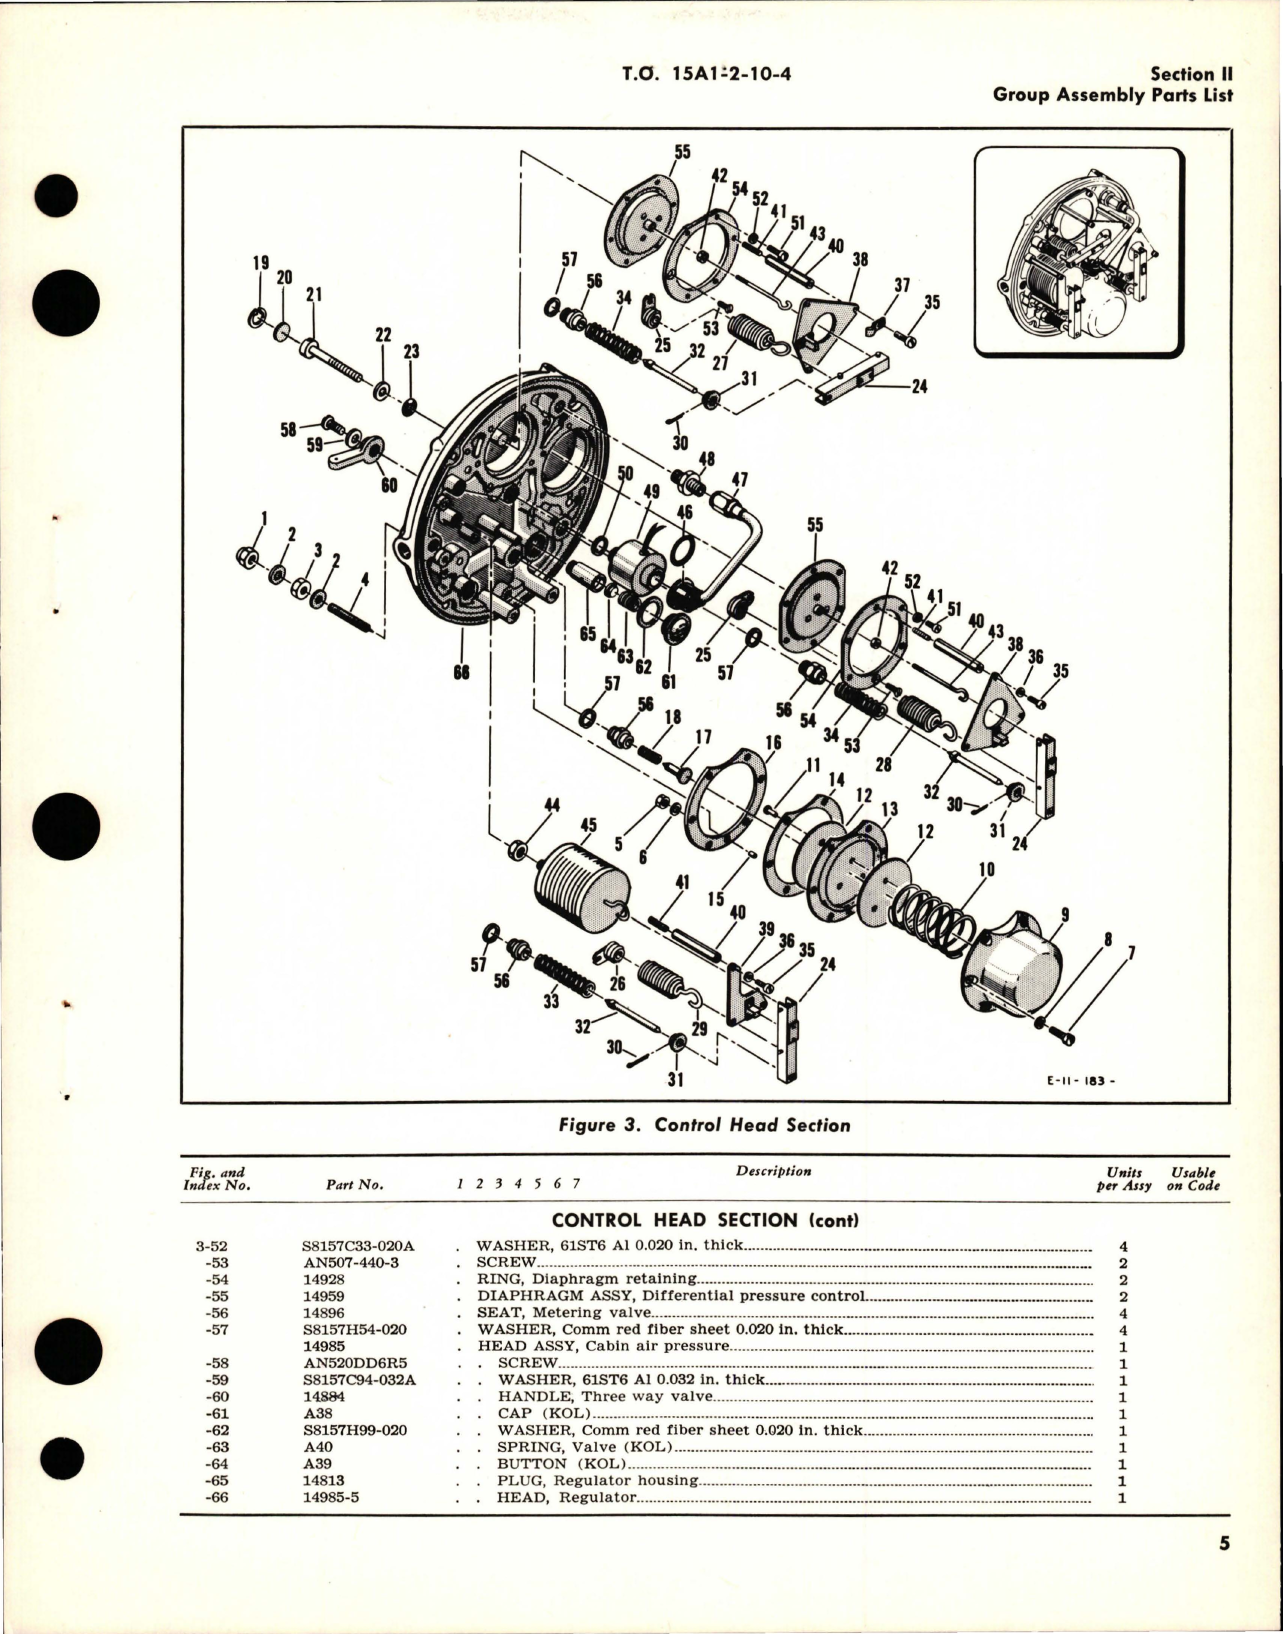 Sample page 7 from AirCorps Library document: Illustrated Parts Breakdown for Aircraft Cabin Air Pressure Regulators